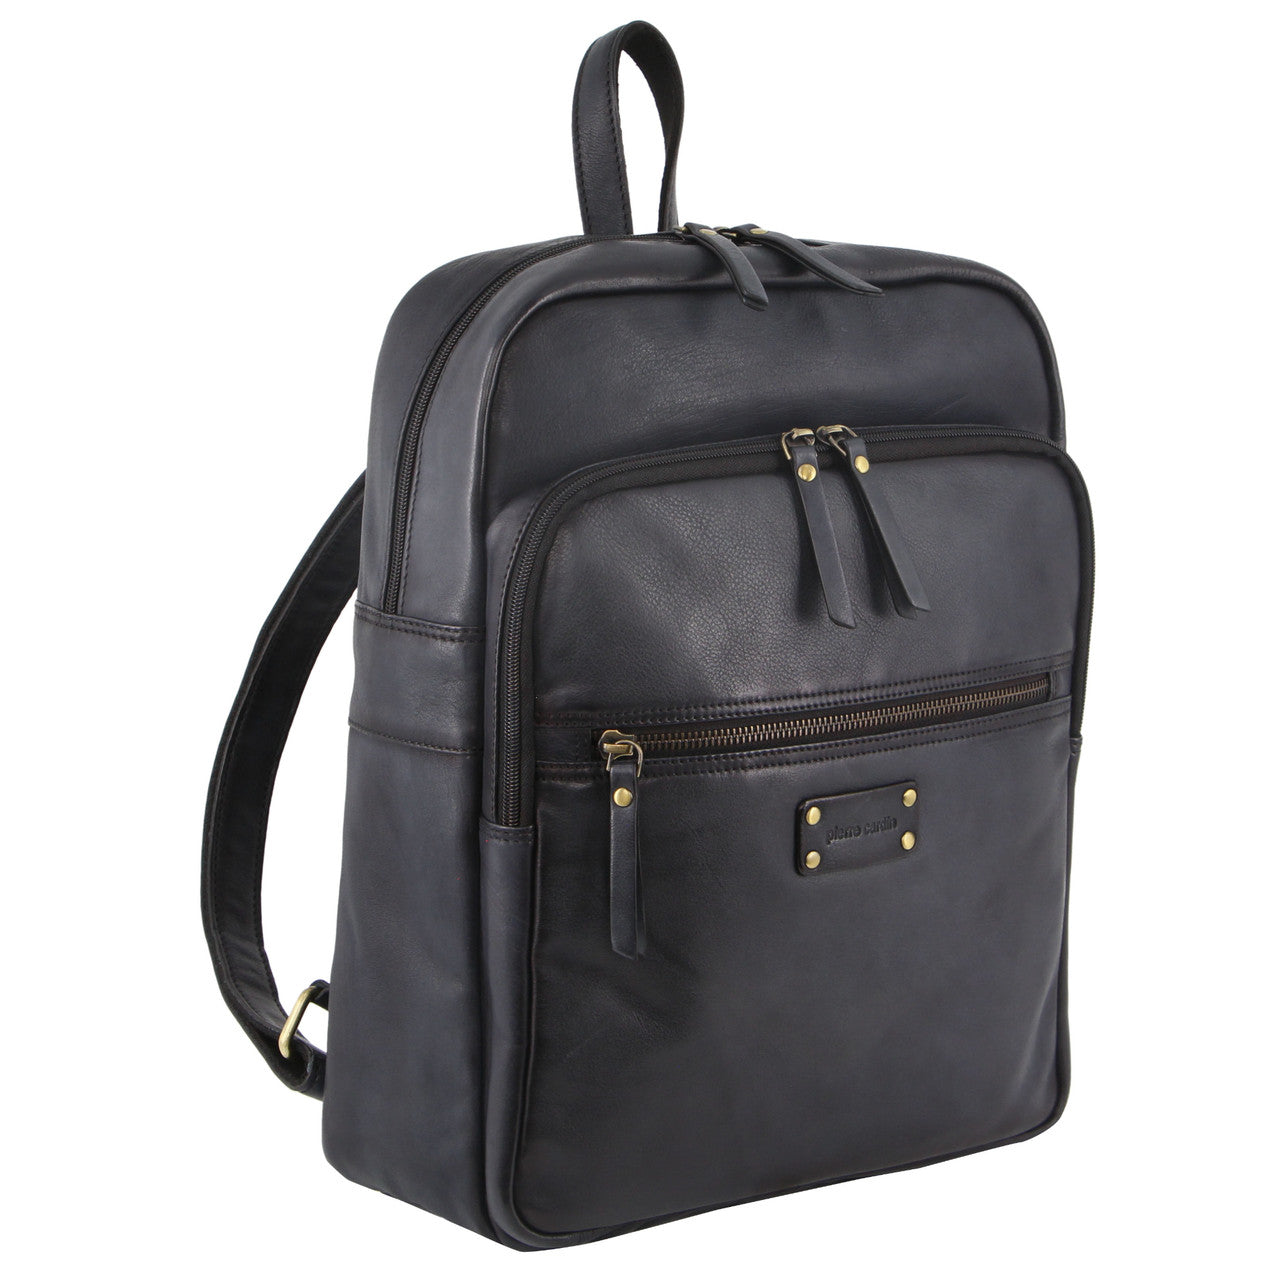 Pierre Cardin Burnished Leather Multi-Compartment Laptop Backpack PC3332 Black